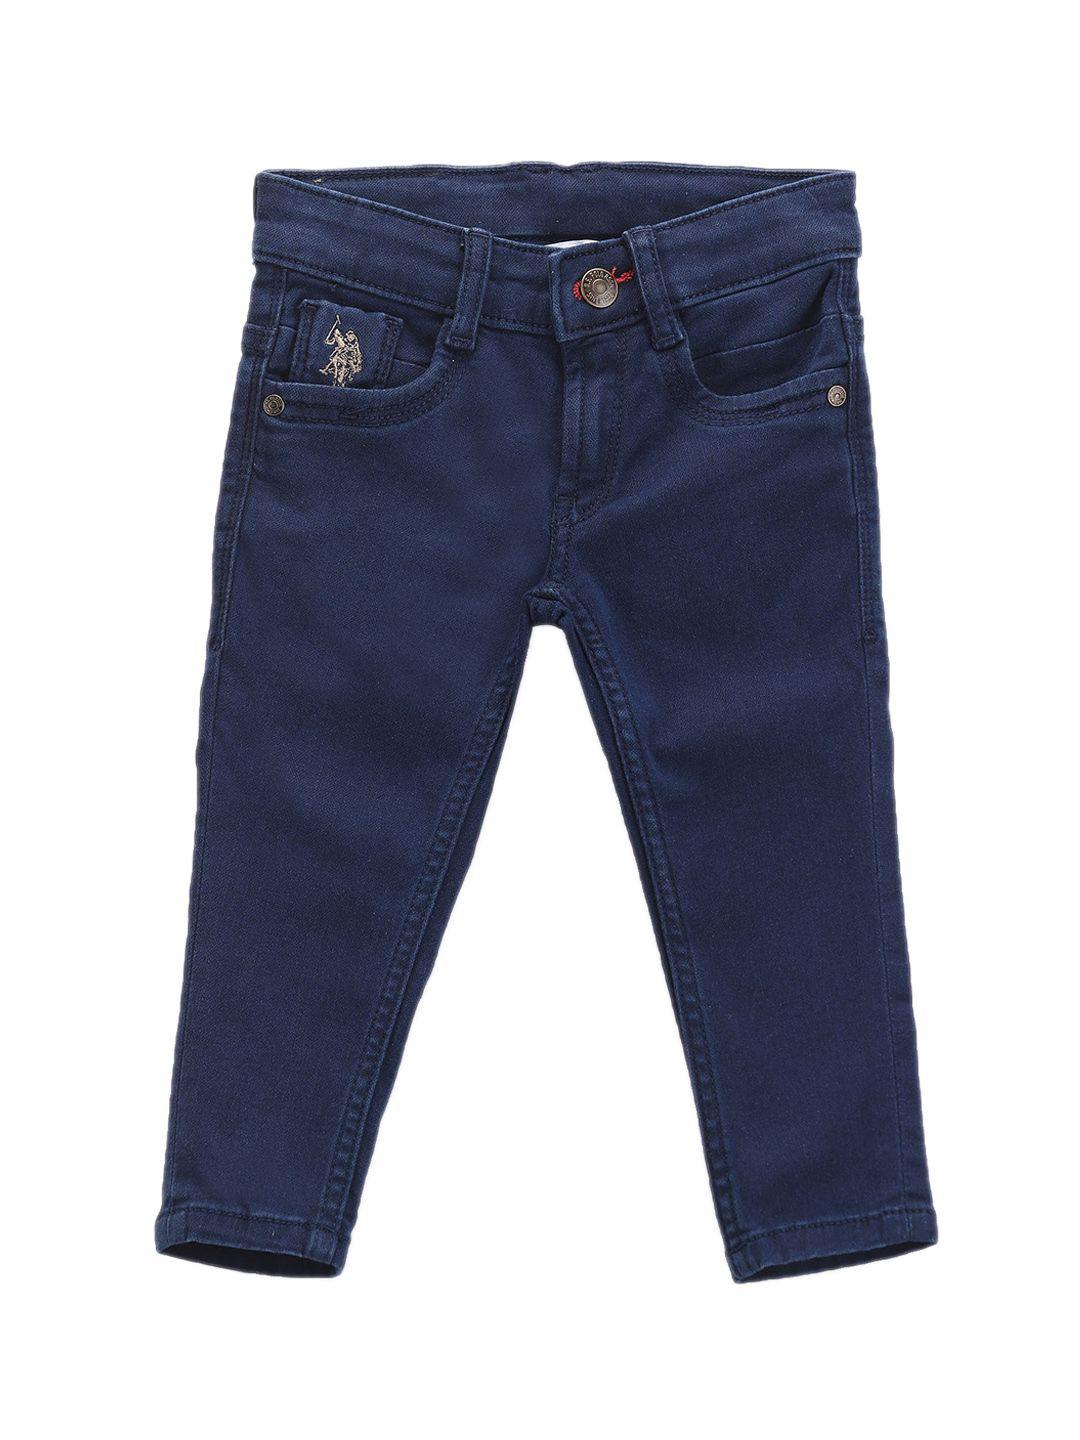 u.s. polo assn. kids boys skinny fit mid-rise stretchable jeans